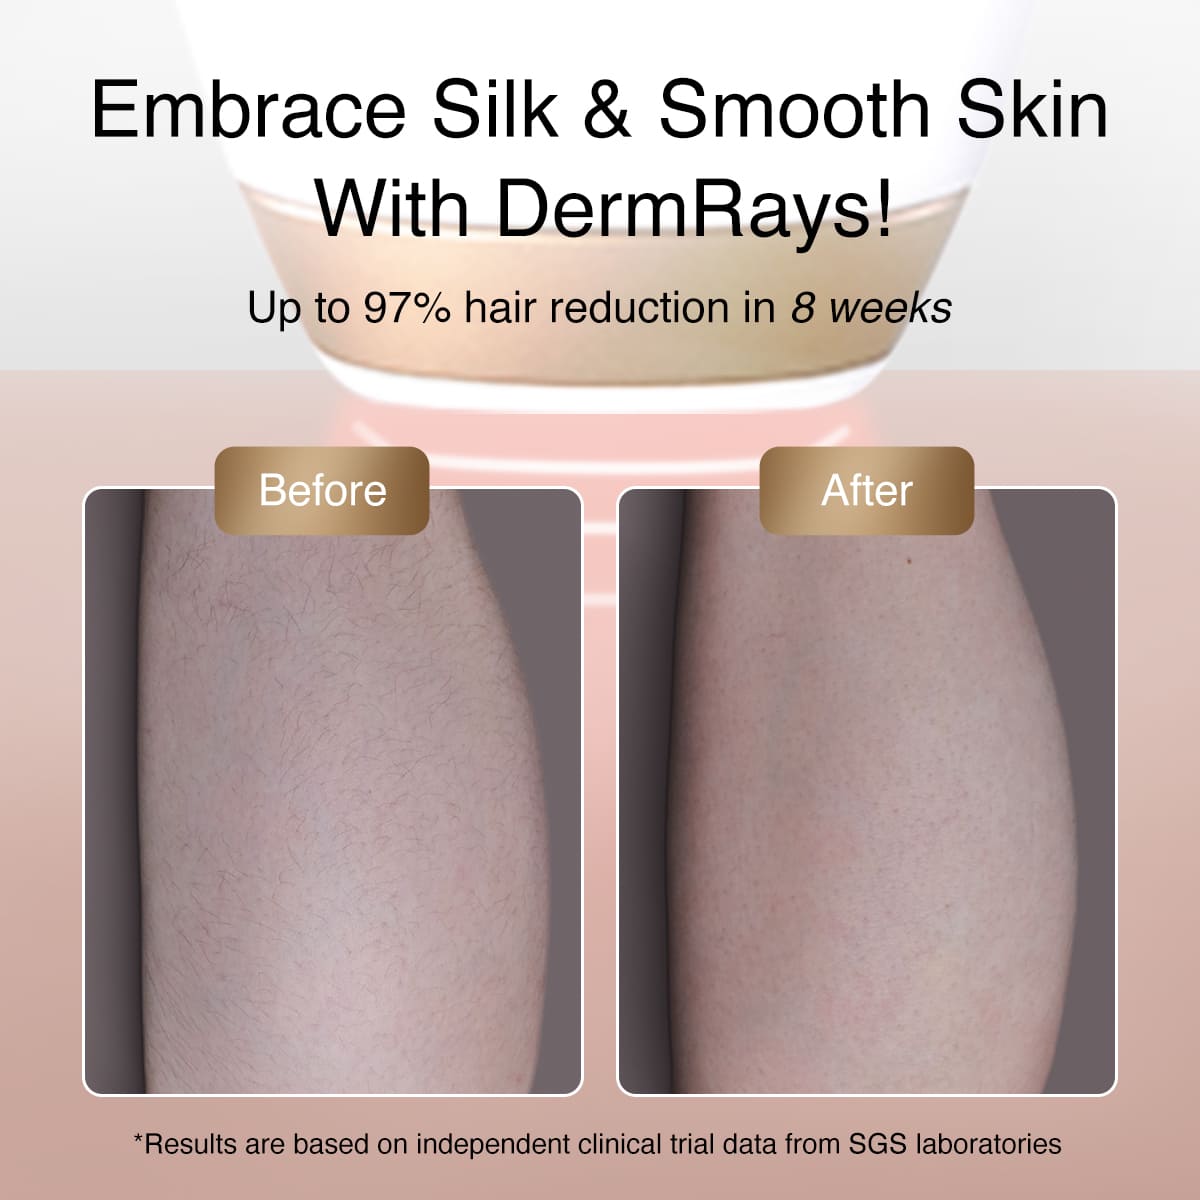 DermRays V4S Laser Hair Removal, Up to 21J, Specifically For Sensitive Skin